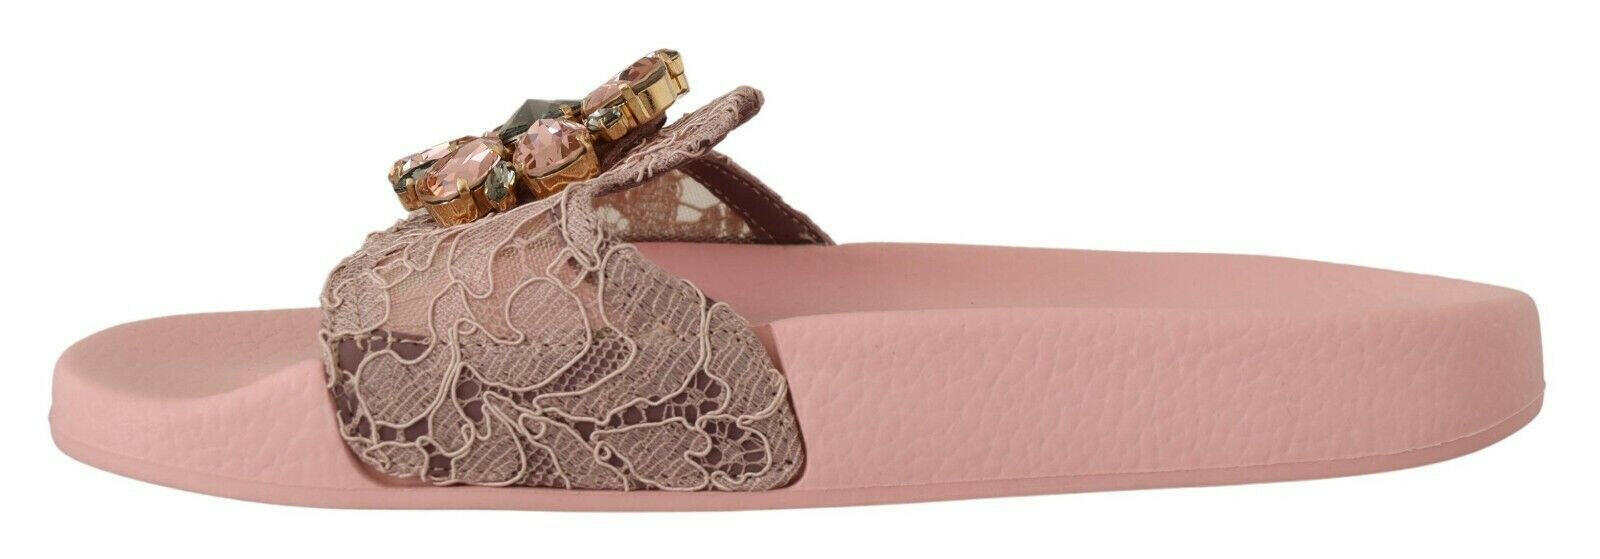 Dolce & Gabbana Pink Lace Crystal Sandals Slides Beach Shoes - GENUINE AUTHENTIC BRAND LLC  